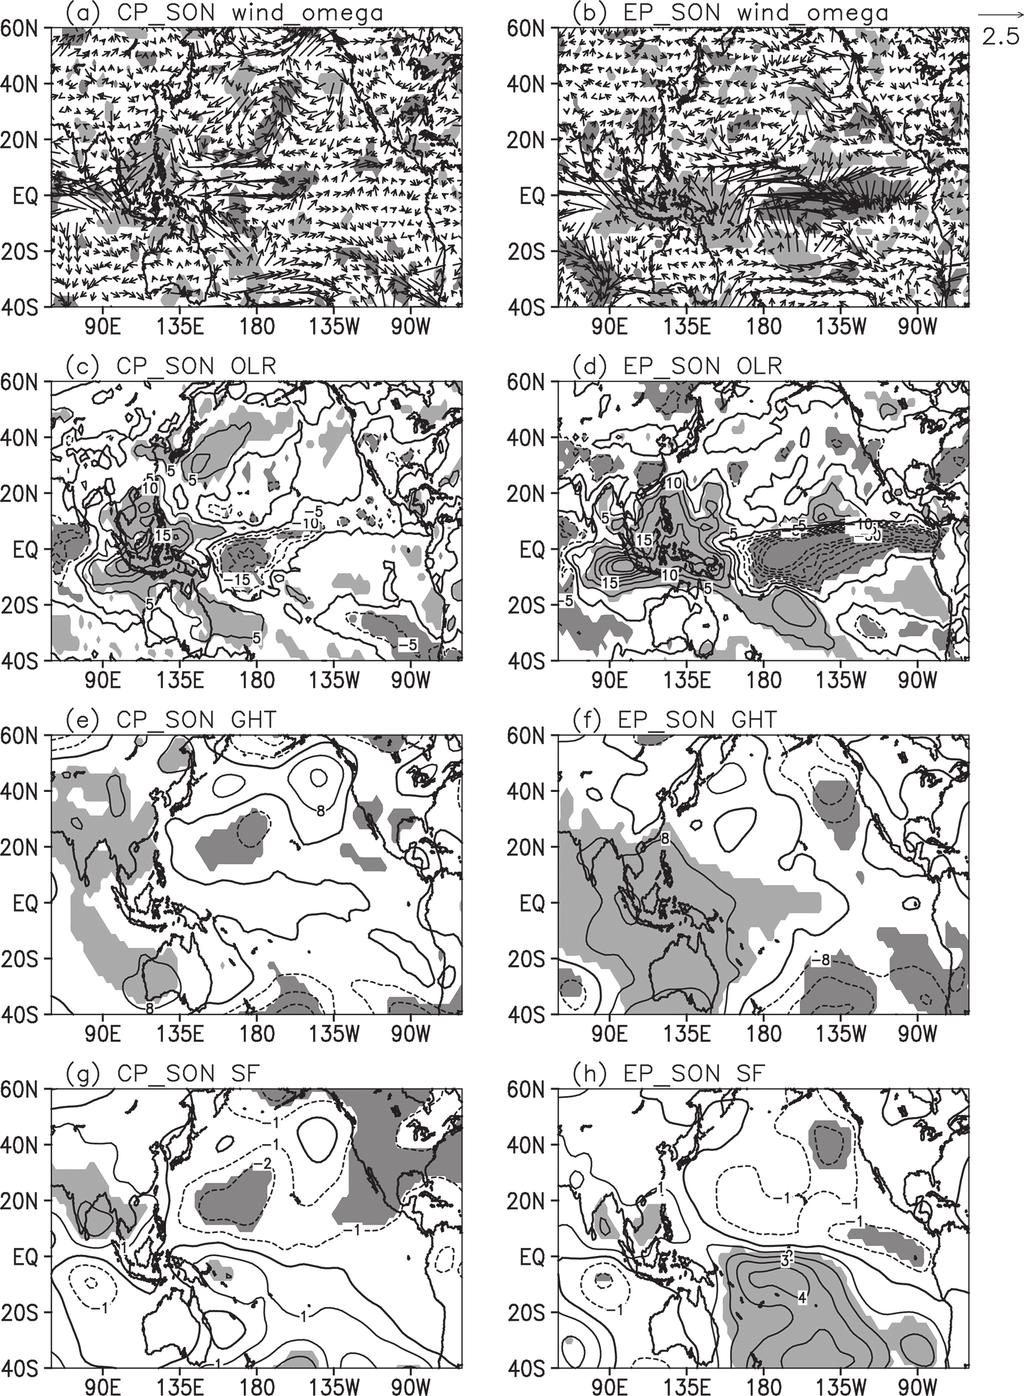 366 Journal of the Meteorological Society of Japan Fig. 5. Vol. 94, No. 4 As in Fig.